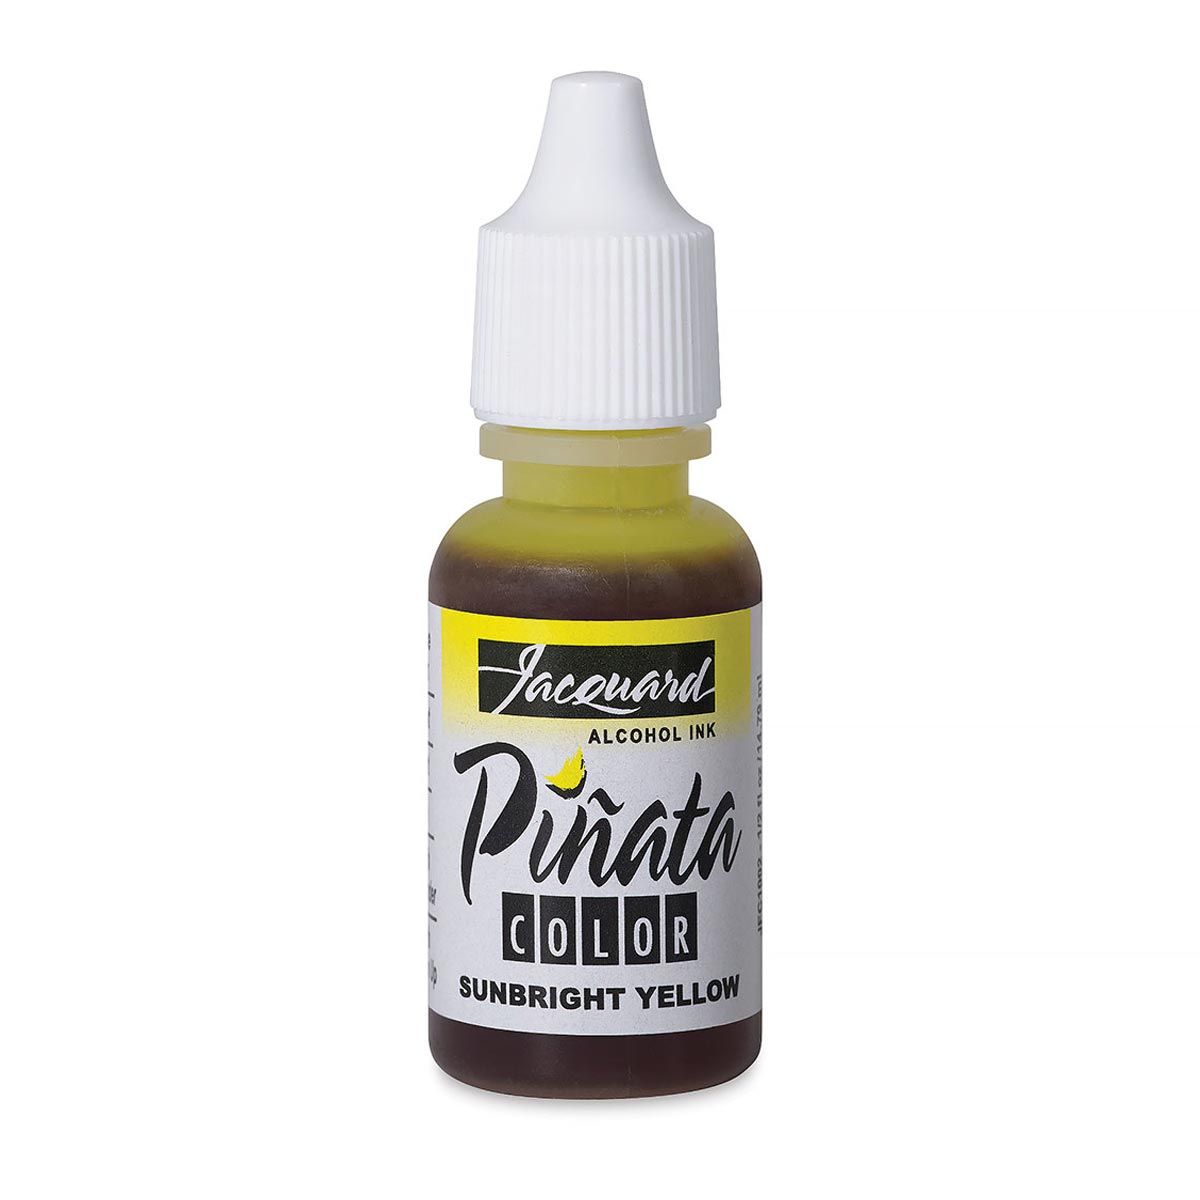 Pinata Color Alcohol Ink - Sunbright Yellow 0.5-ounce